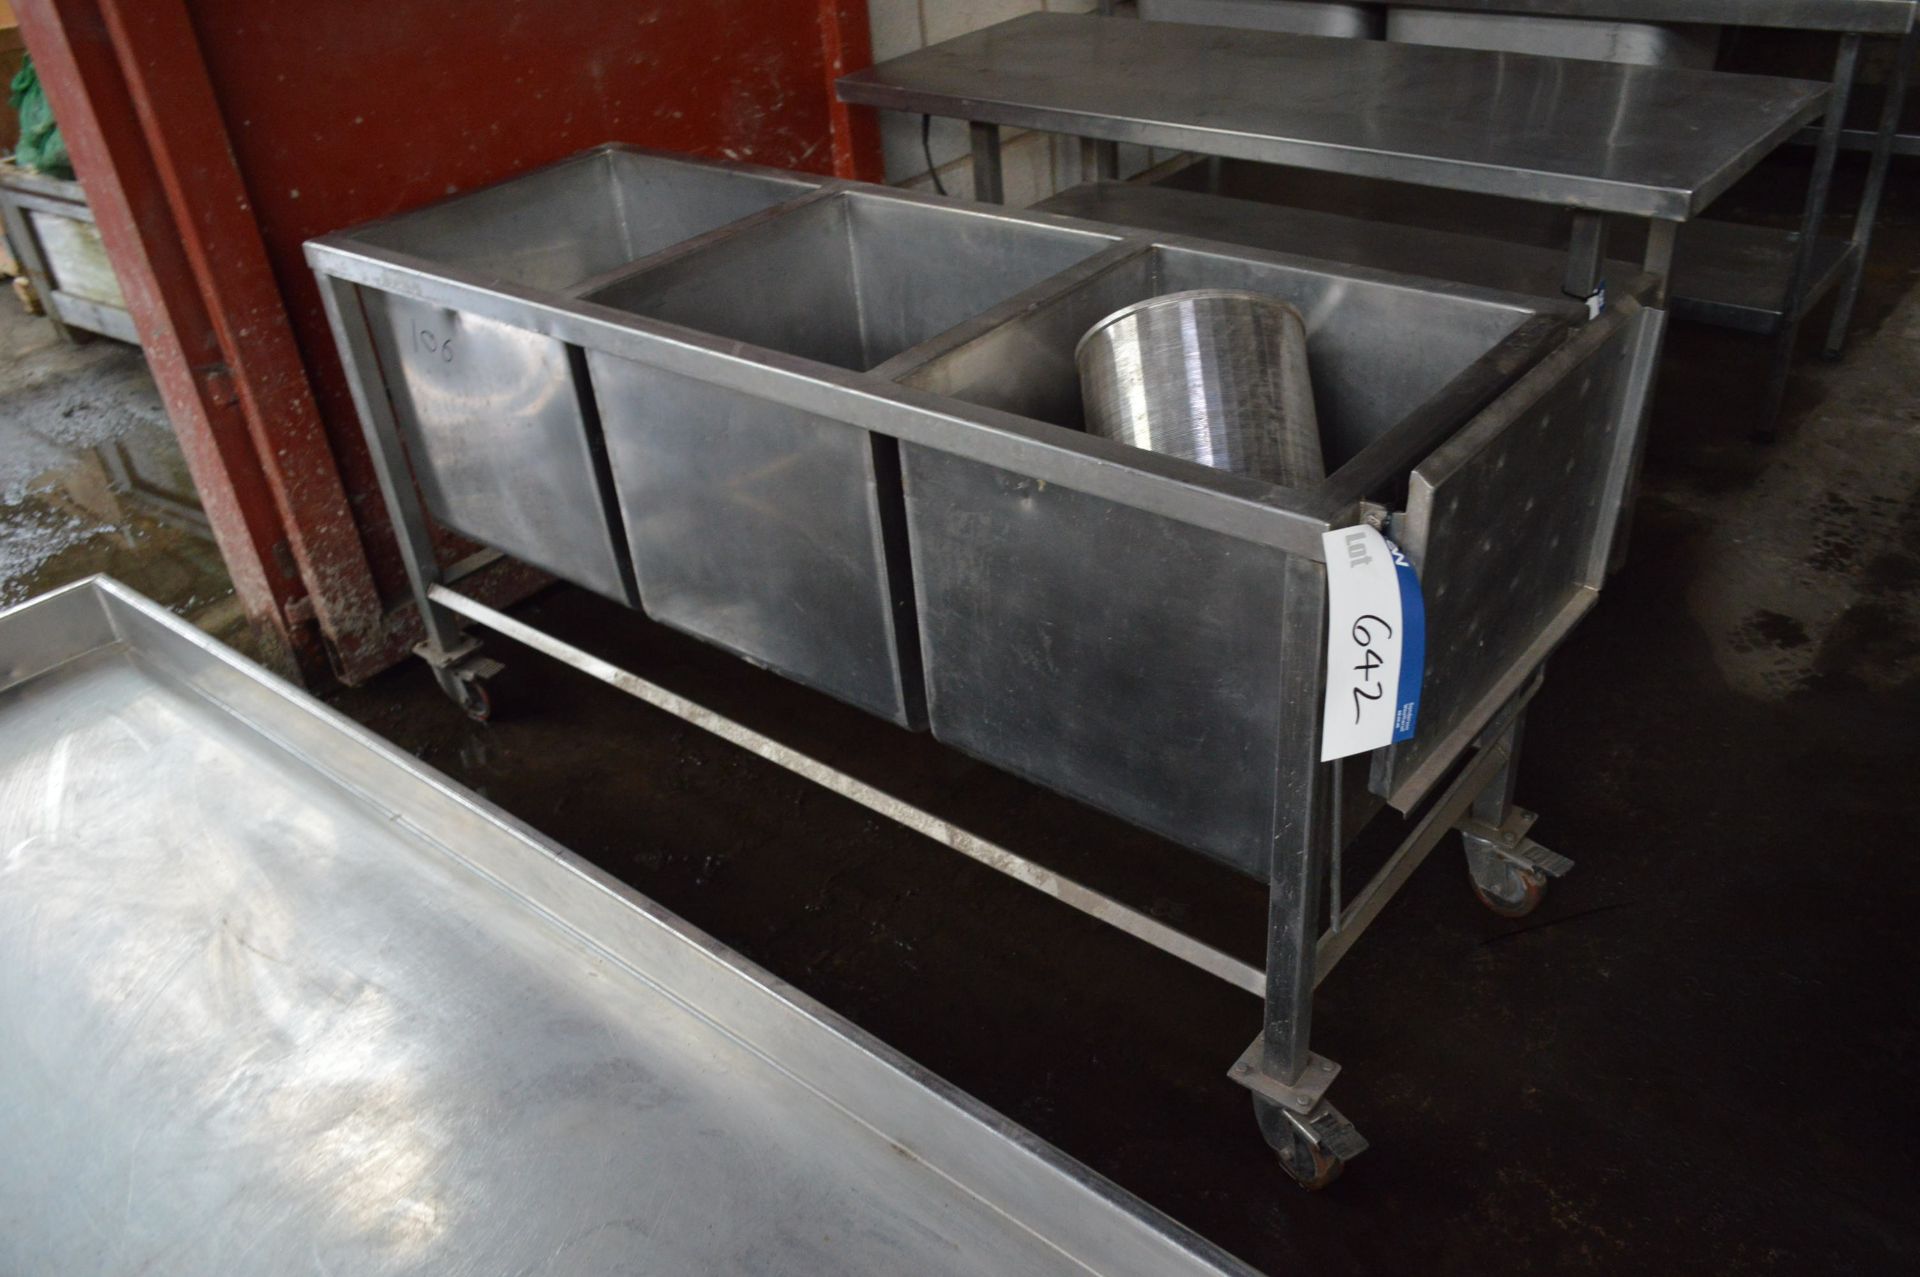 Protech Triple Bowl Mobile Stainless Steel Sink Unit, approx. 1.7m x 590mm x 500mm deep, with fold